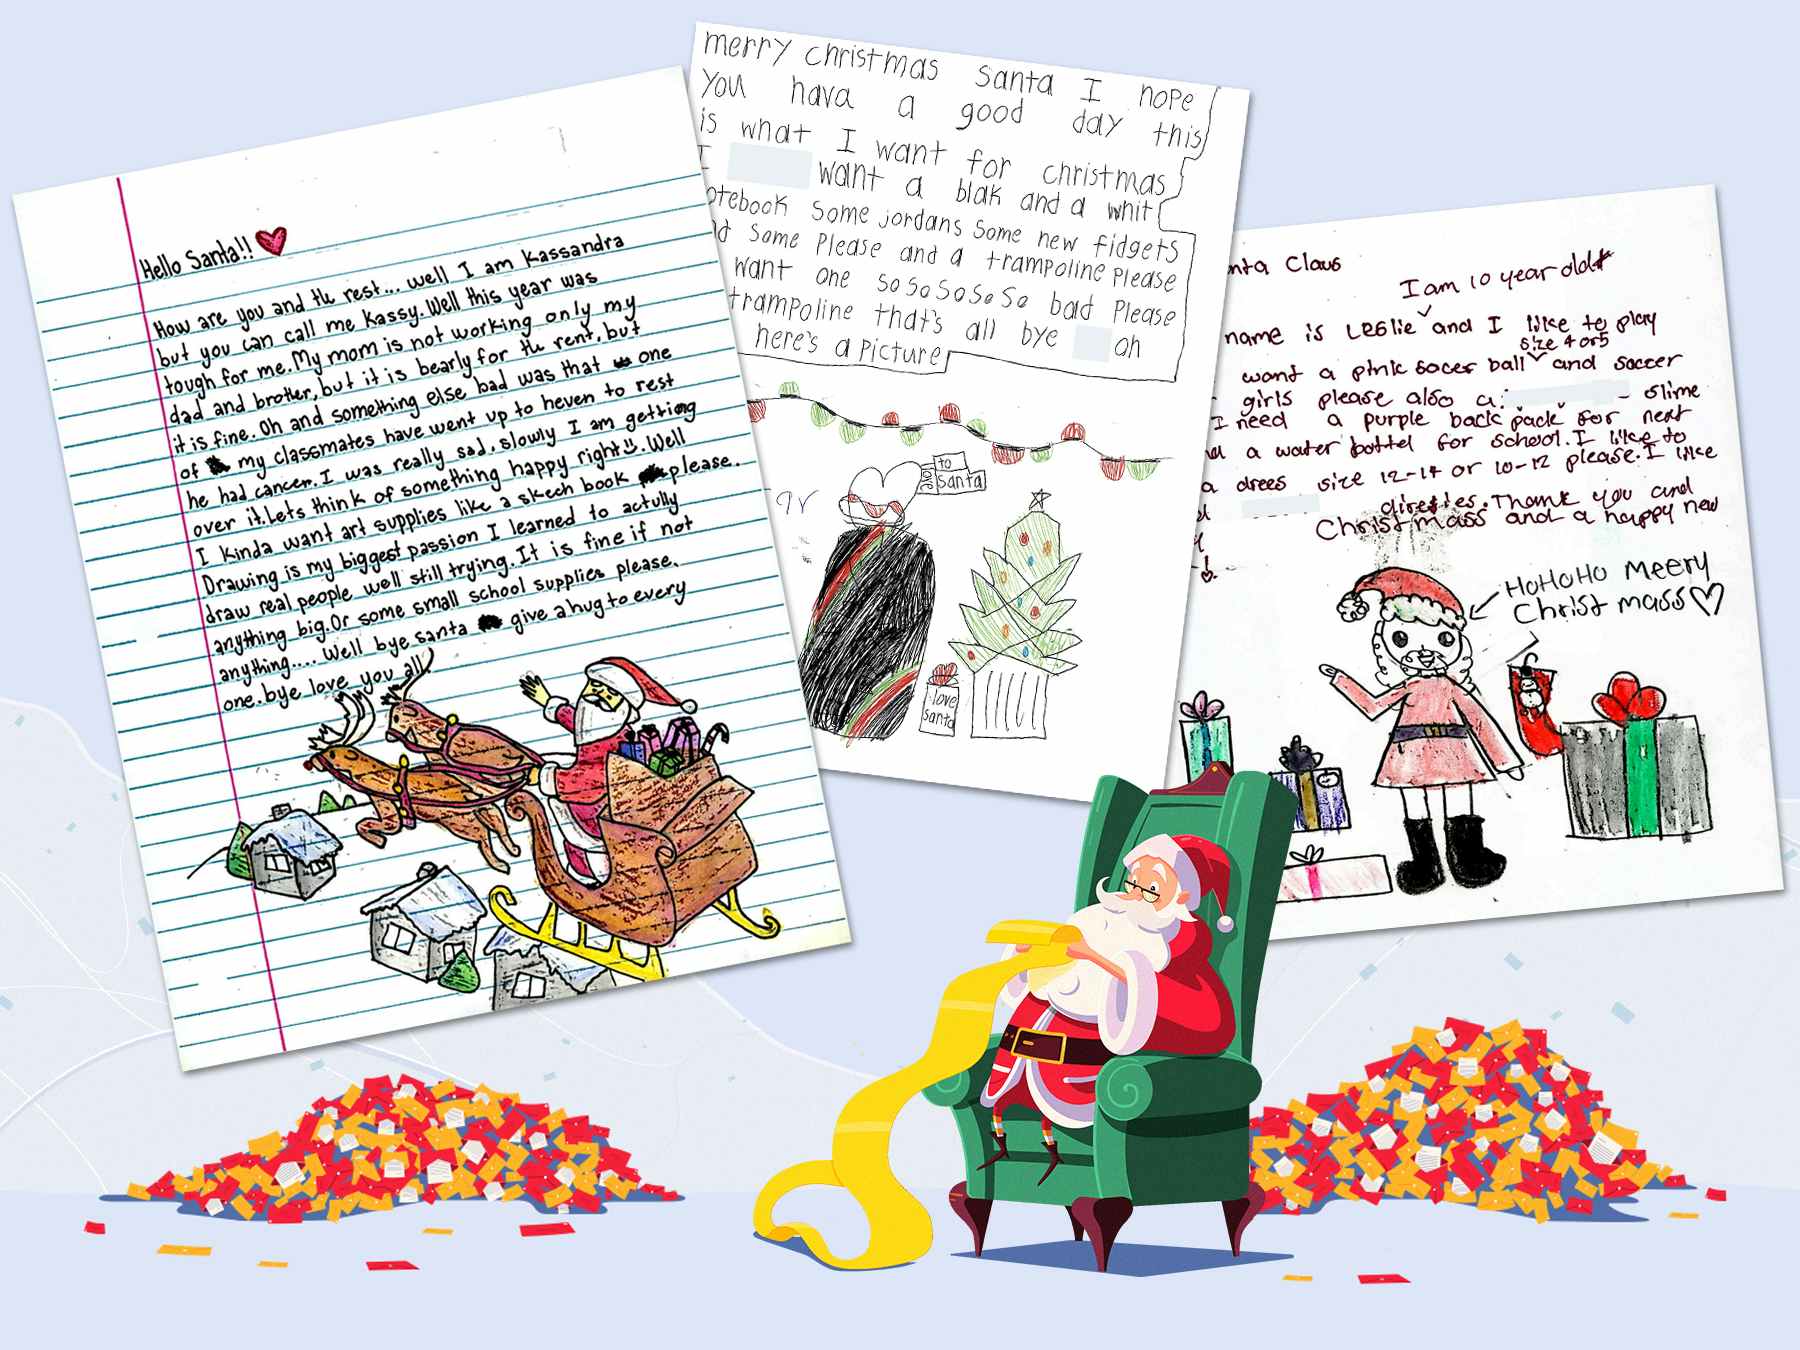 Letters to santa from Operation Santa.